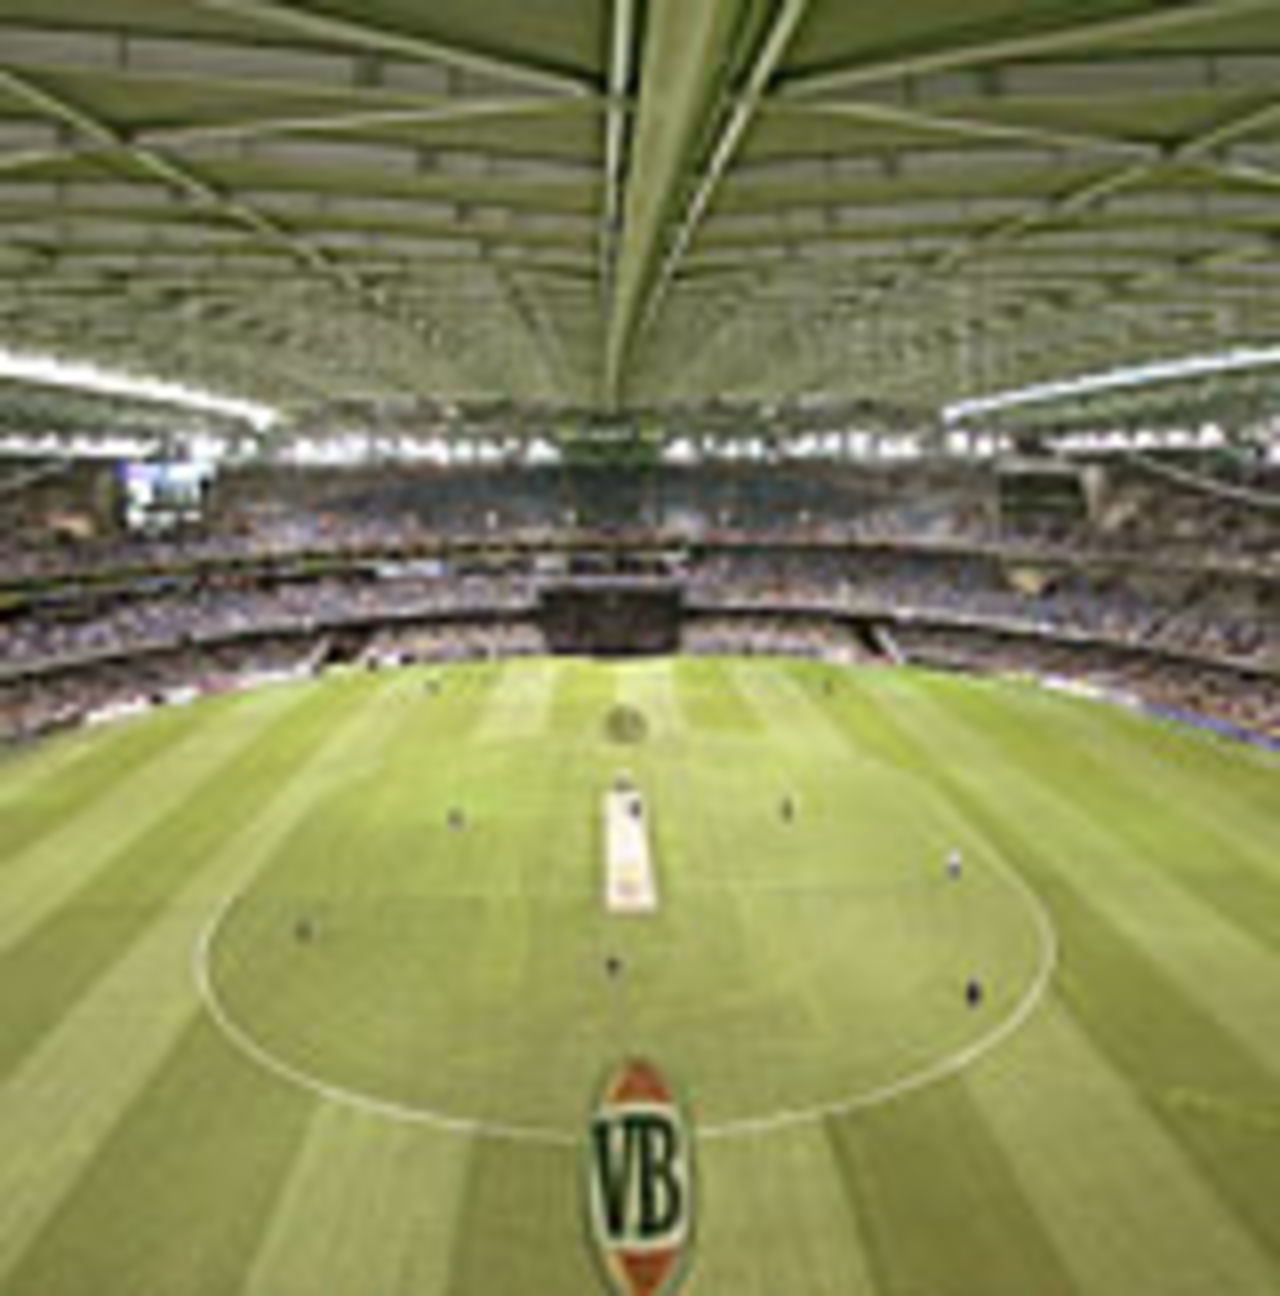 Closed roof at the Telstra Dome, Australia v New Zealand, 1st ODI, Melbourne, December 5 2004